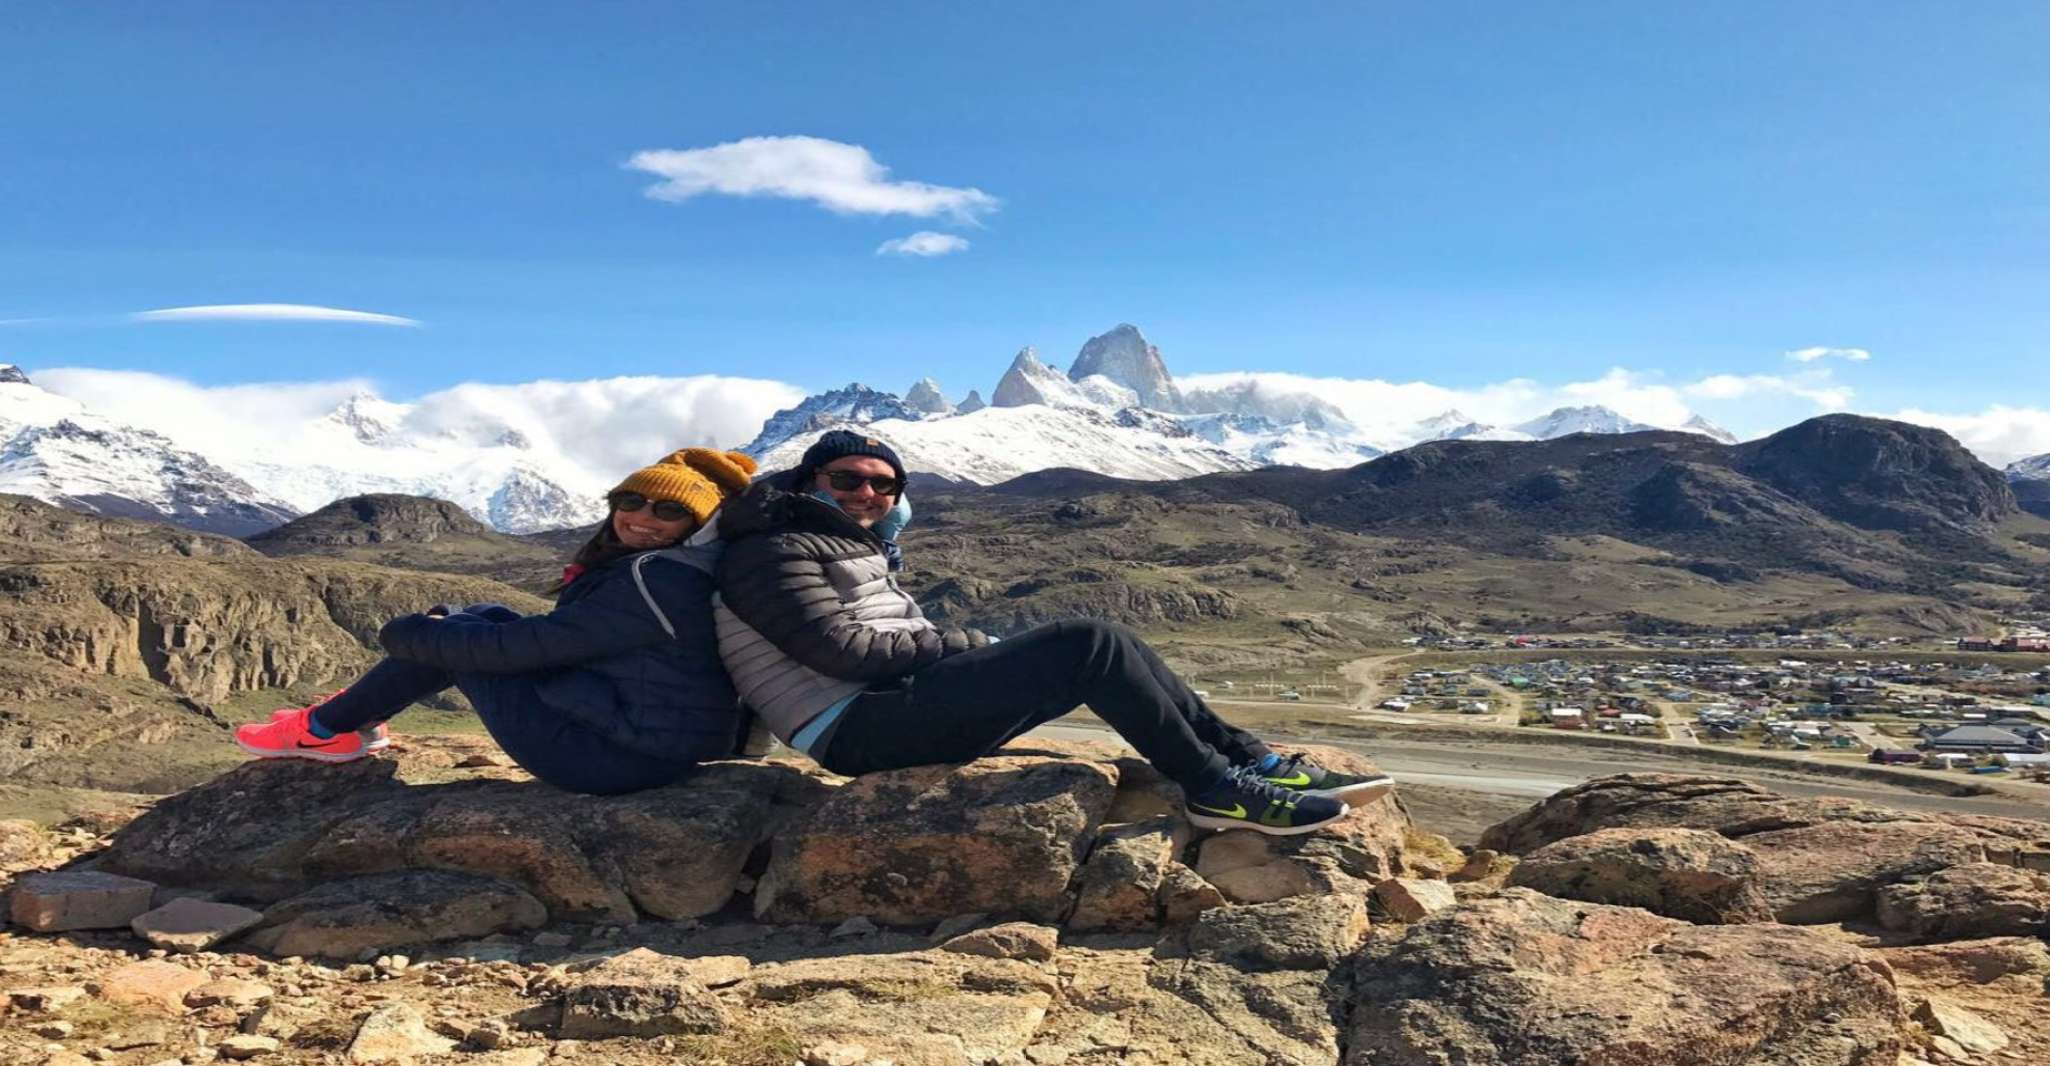 From El Calafate, Full-Day Tour to El Chaltén - Housity